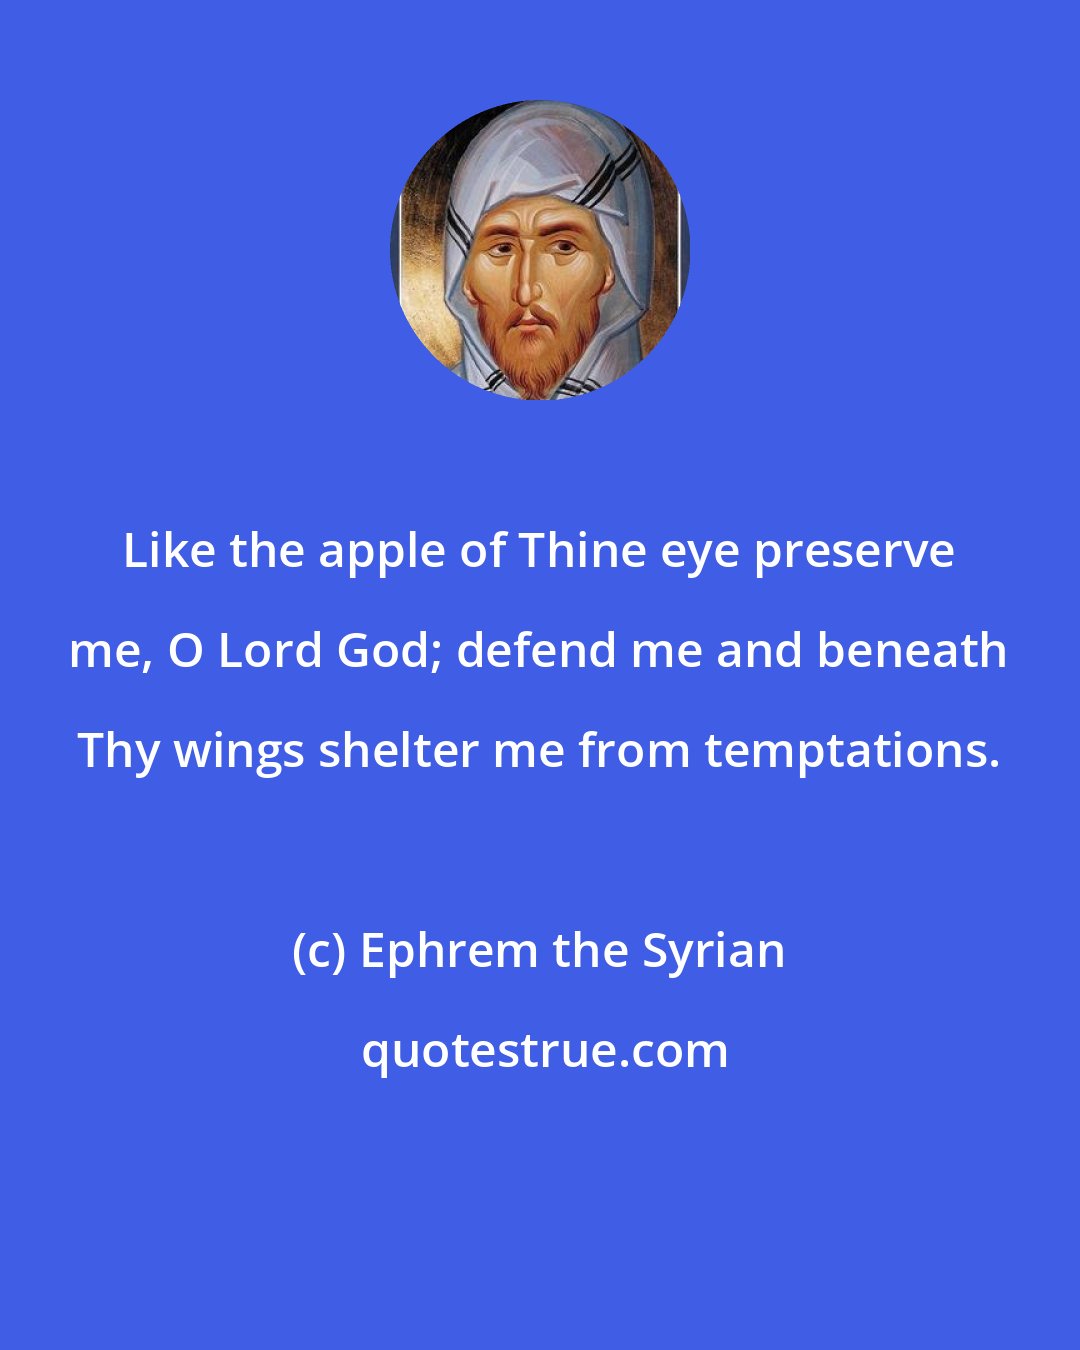 Ephrem the Syrian: Like the apple of Thine eye preserve me, O Lord God; defend me and beneath Thy wings shelter me from temptations.